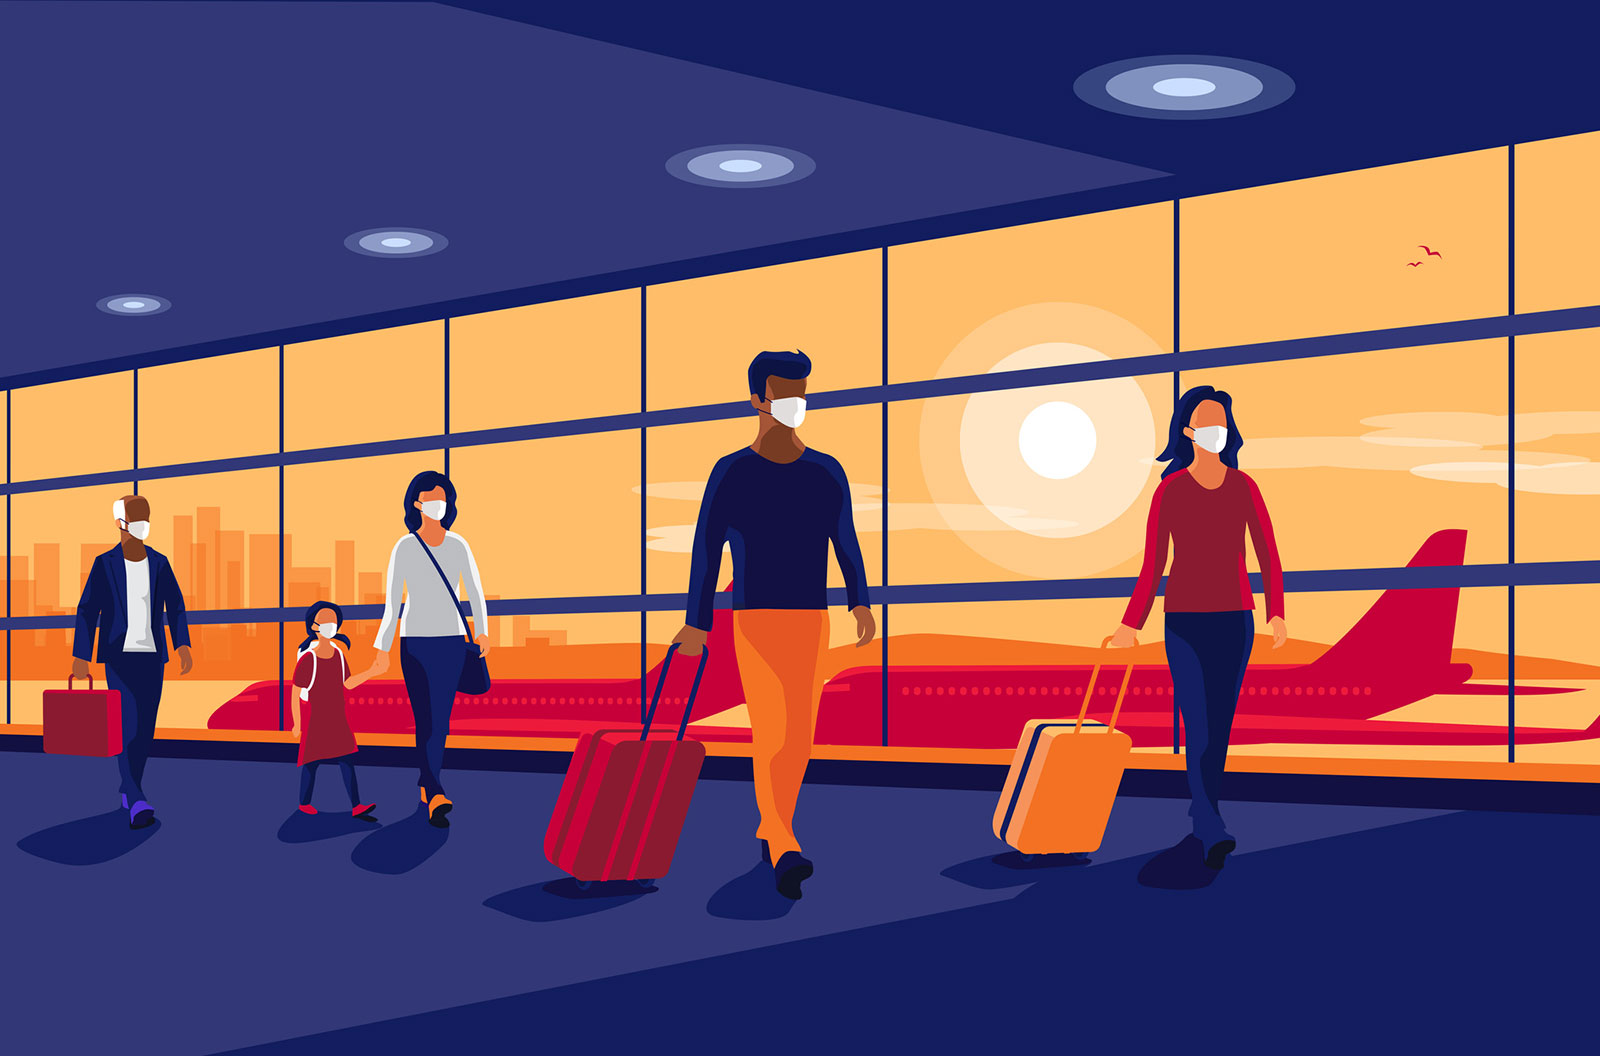 Illustration of passengers walking through an airport in masks.